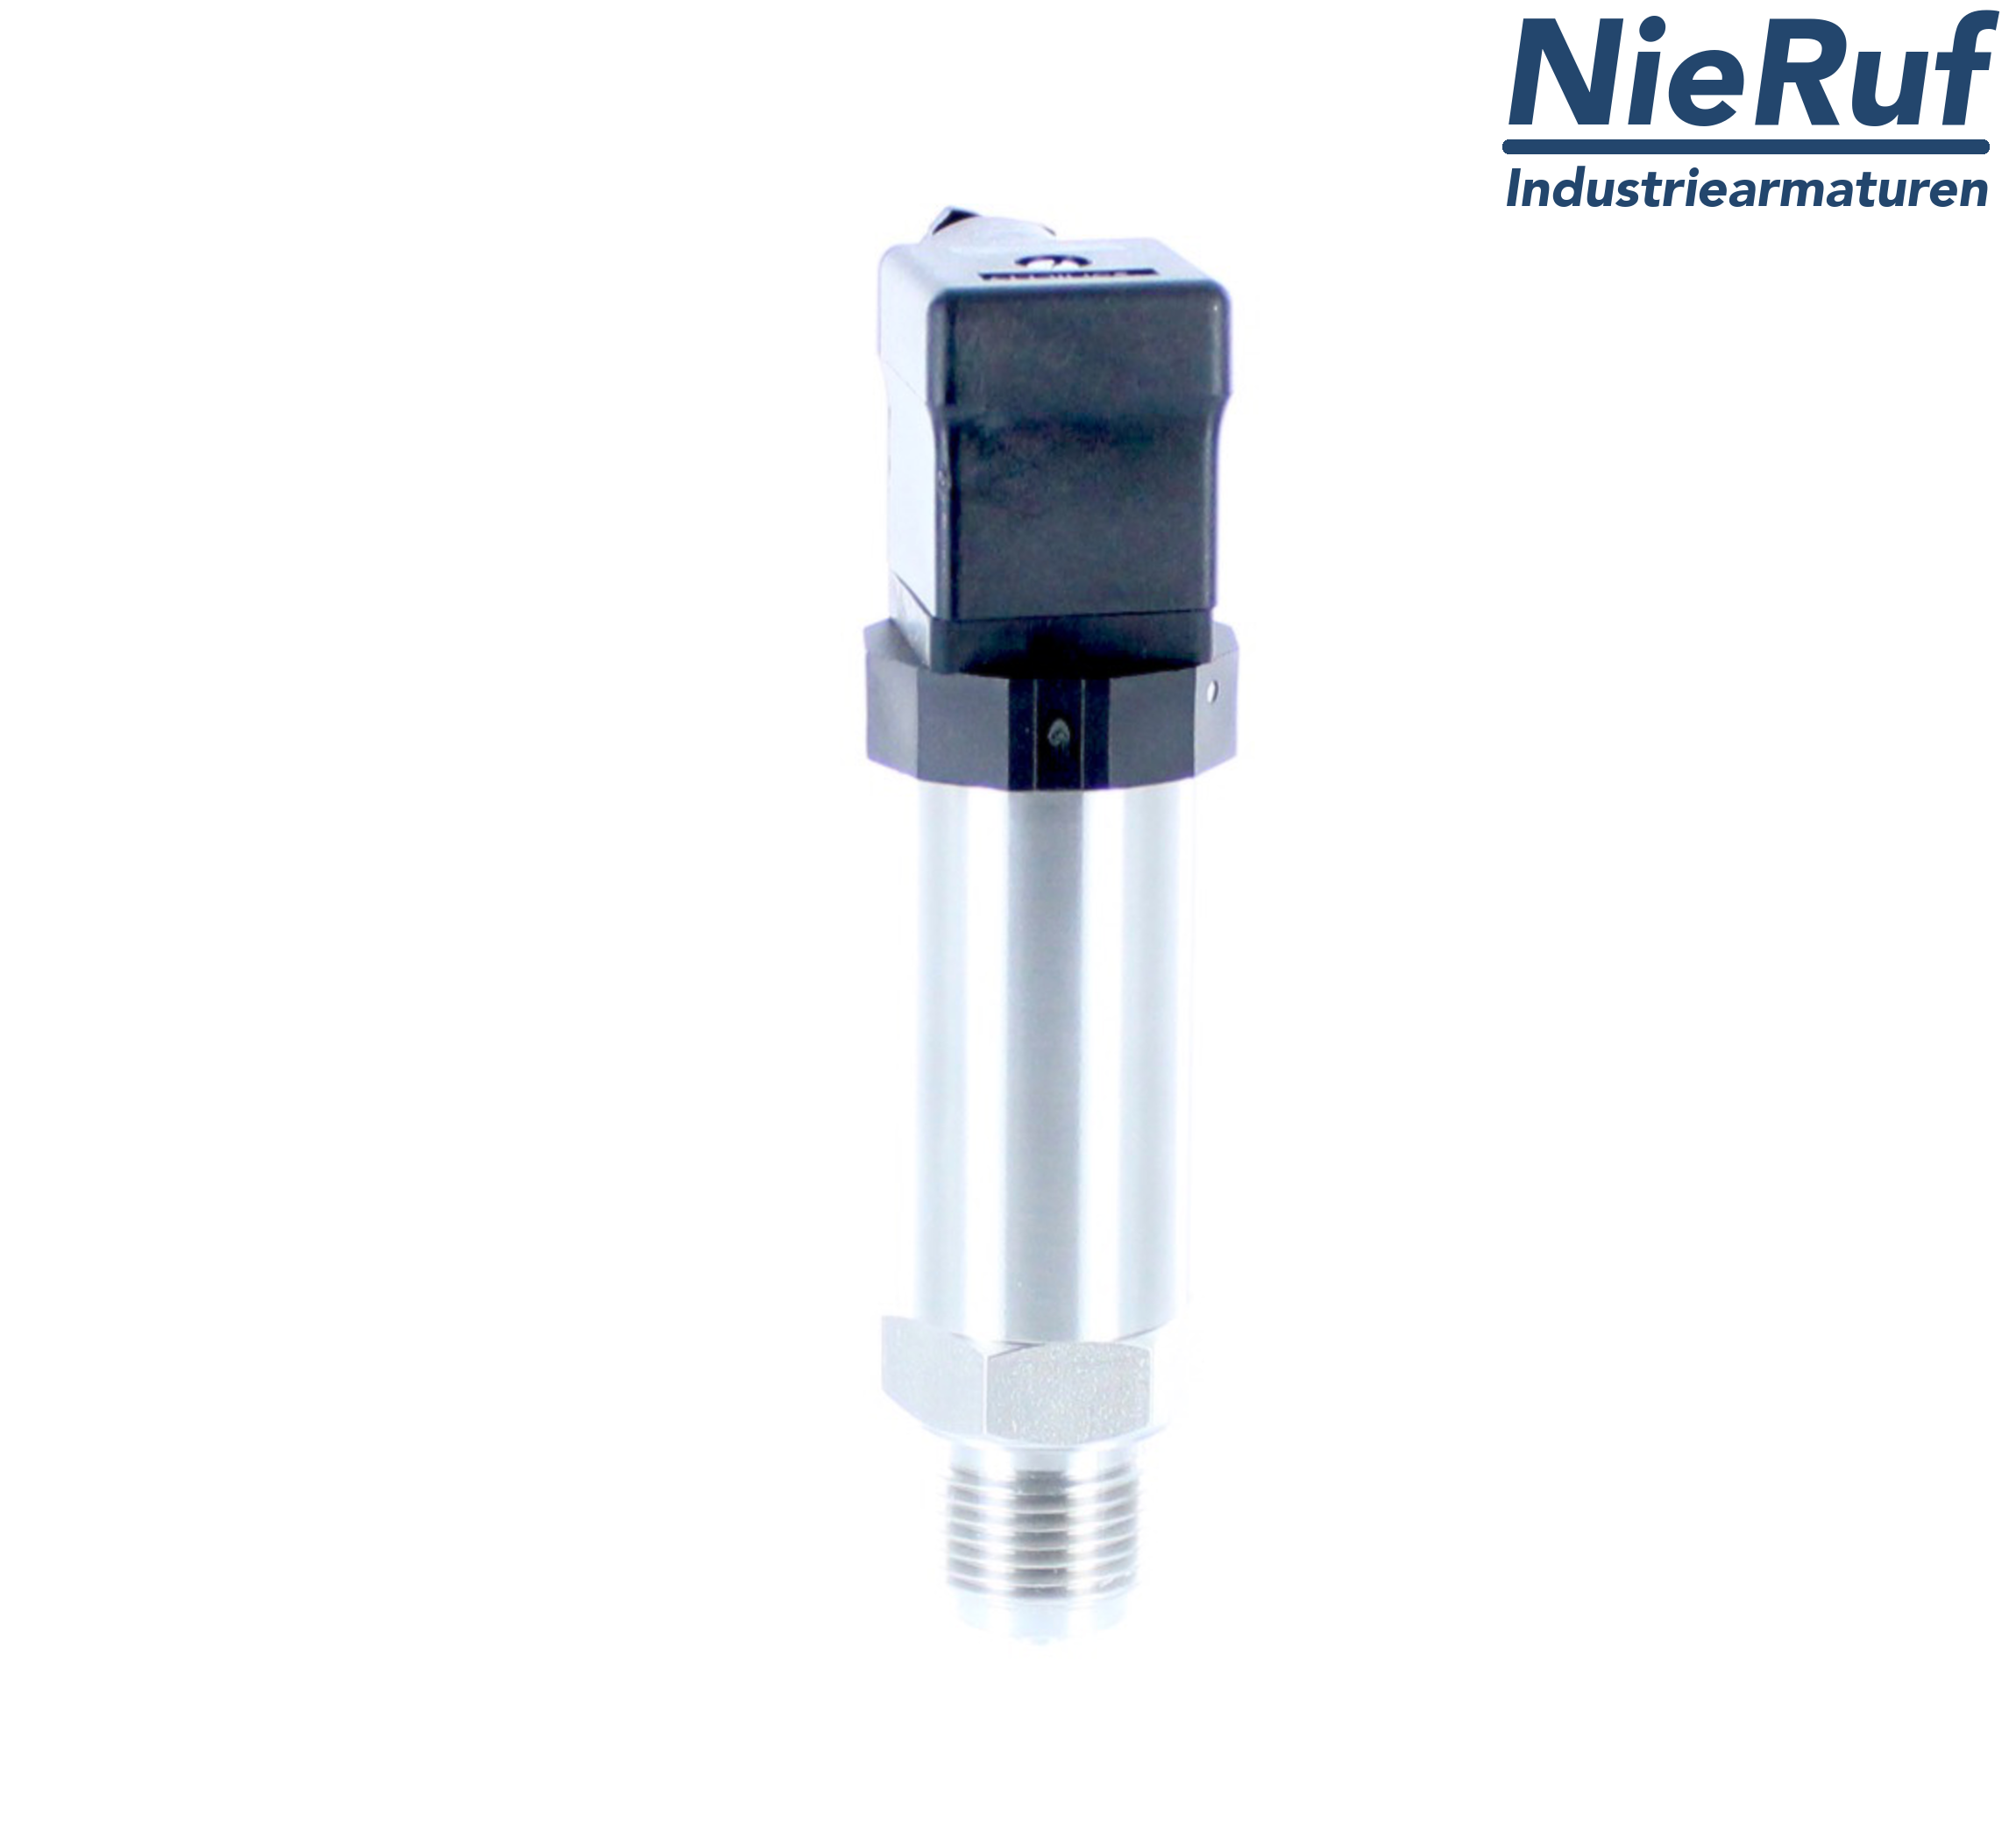 pressure sensor G 1/2" B DS01 stainless steel 2-wire: 4-20mA FPM 0,0 - 10,0 bar